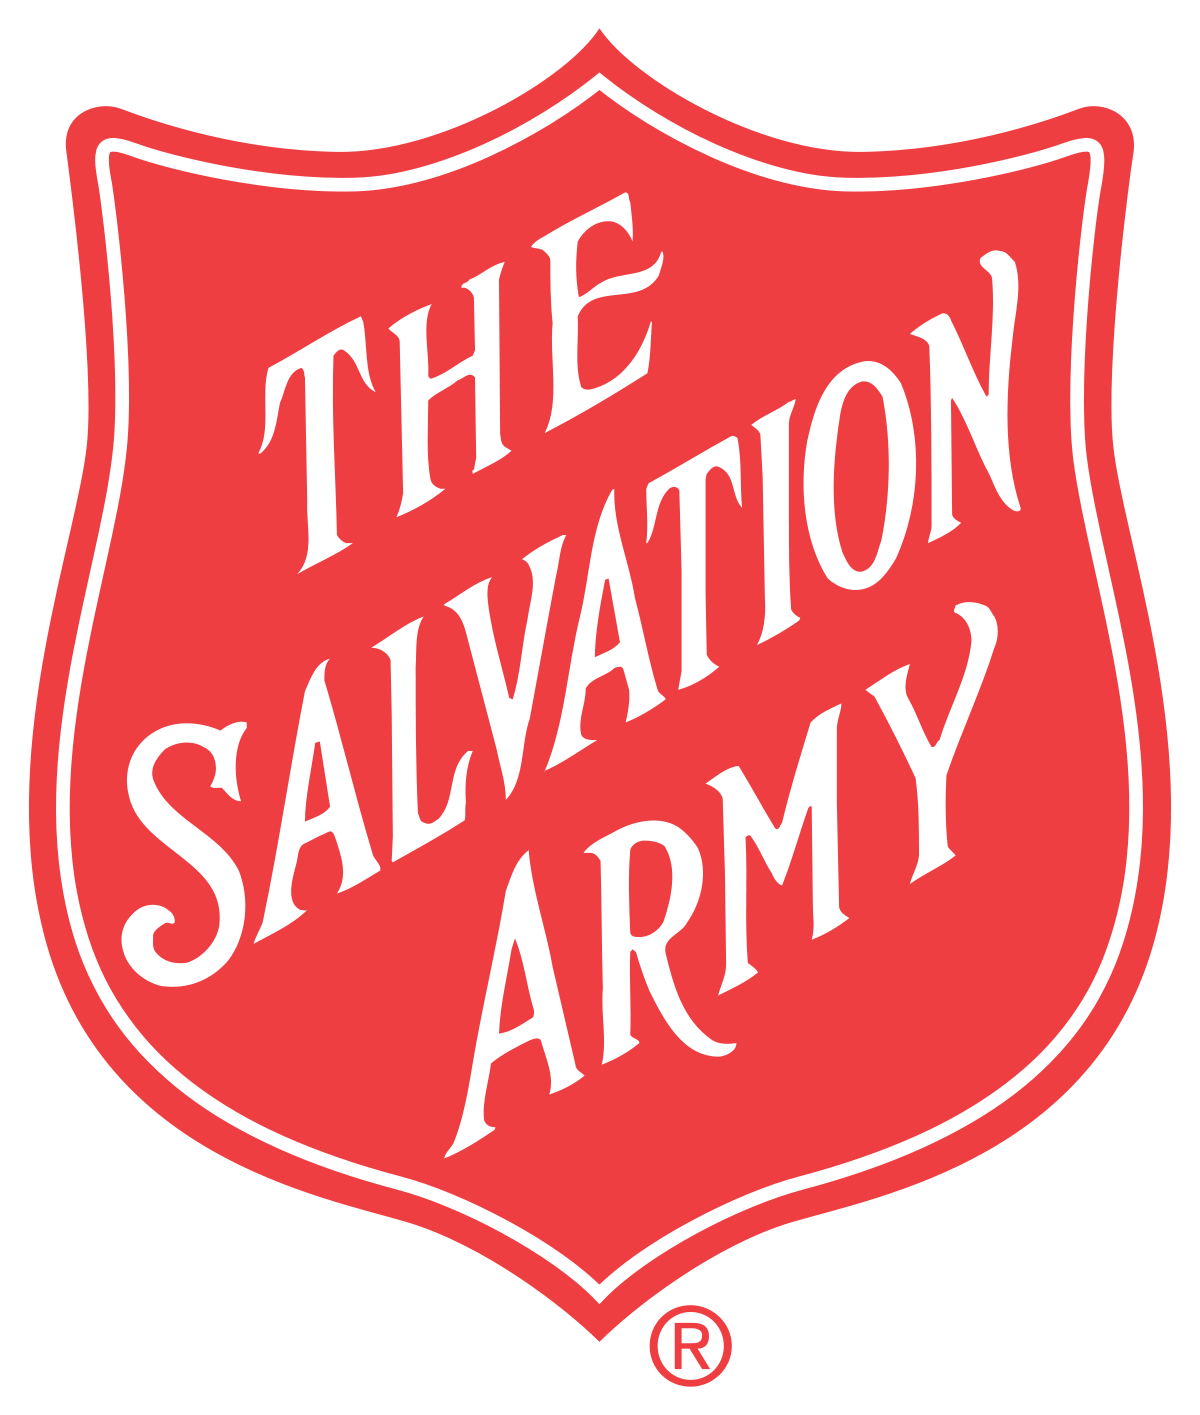 Gold Black and Red Shield Logo - The Salvation Army